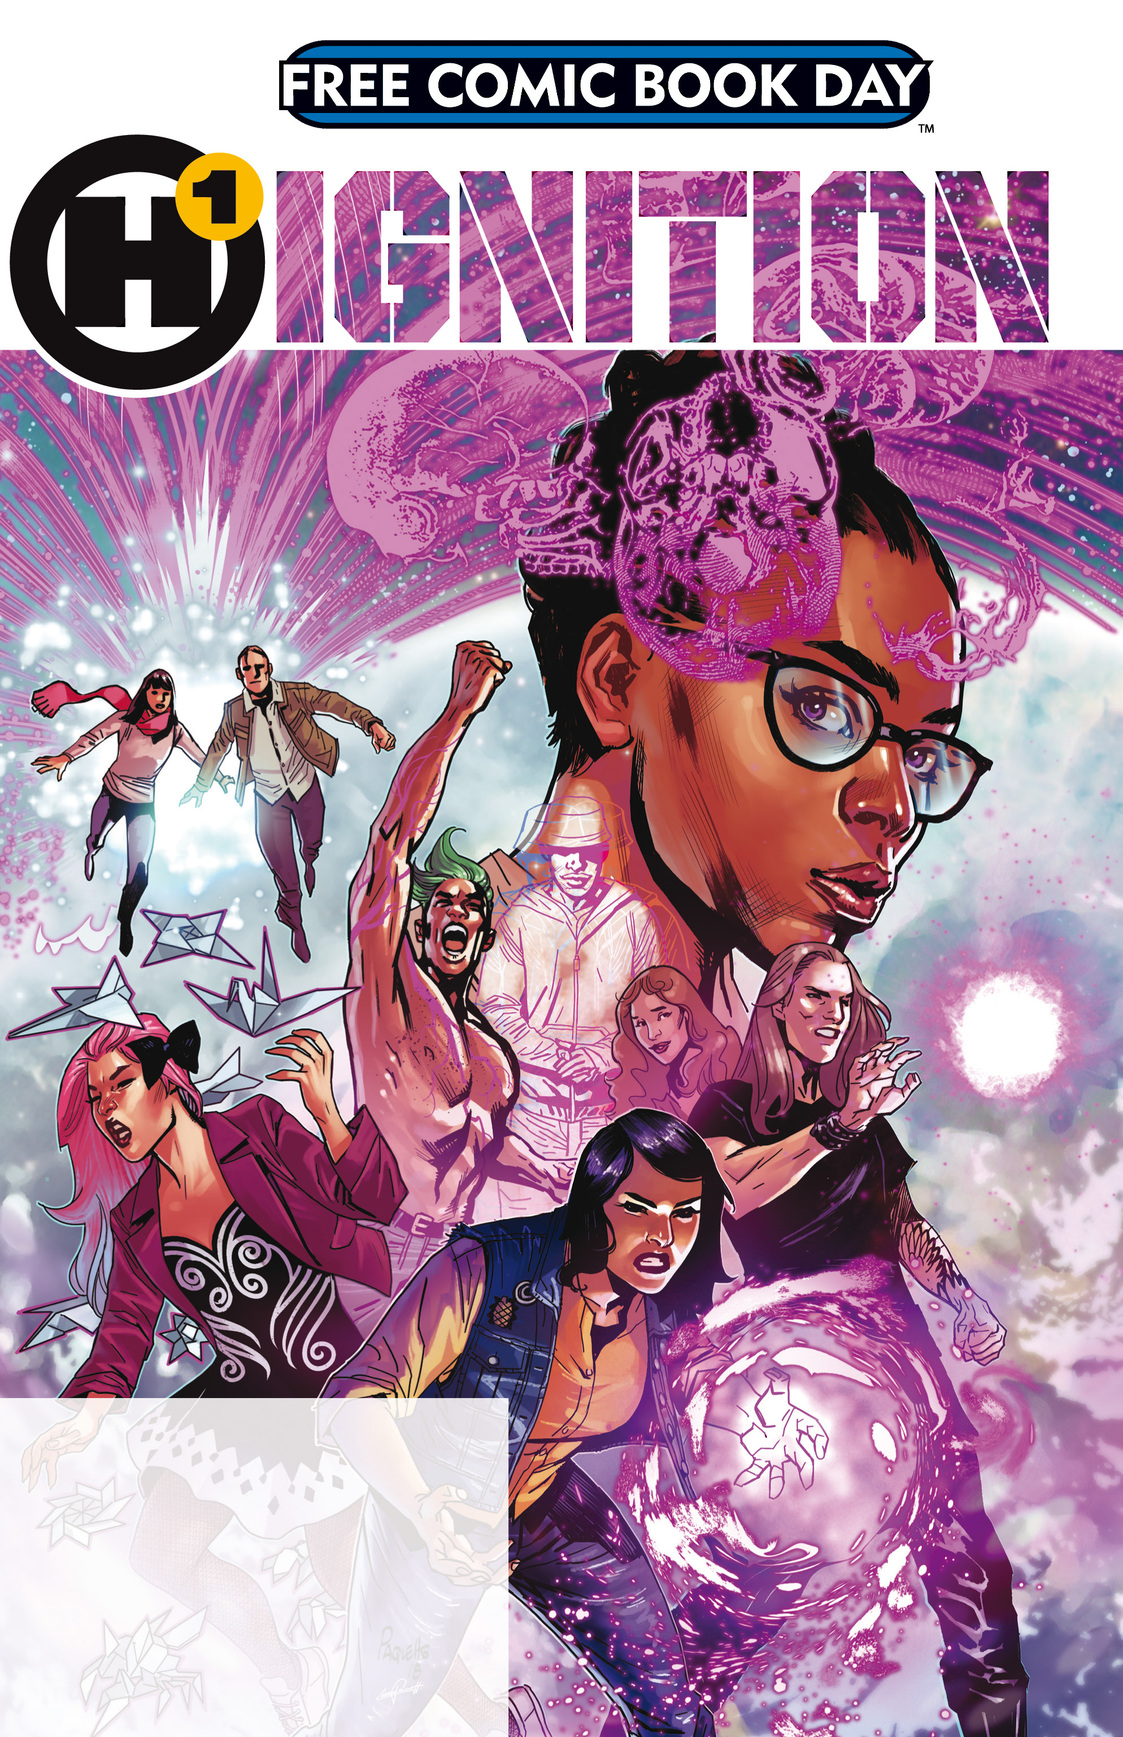 Read online Free Comic Book Day 2019 comic -  Issue # H1 Ignition - 1